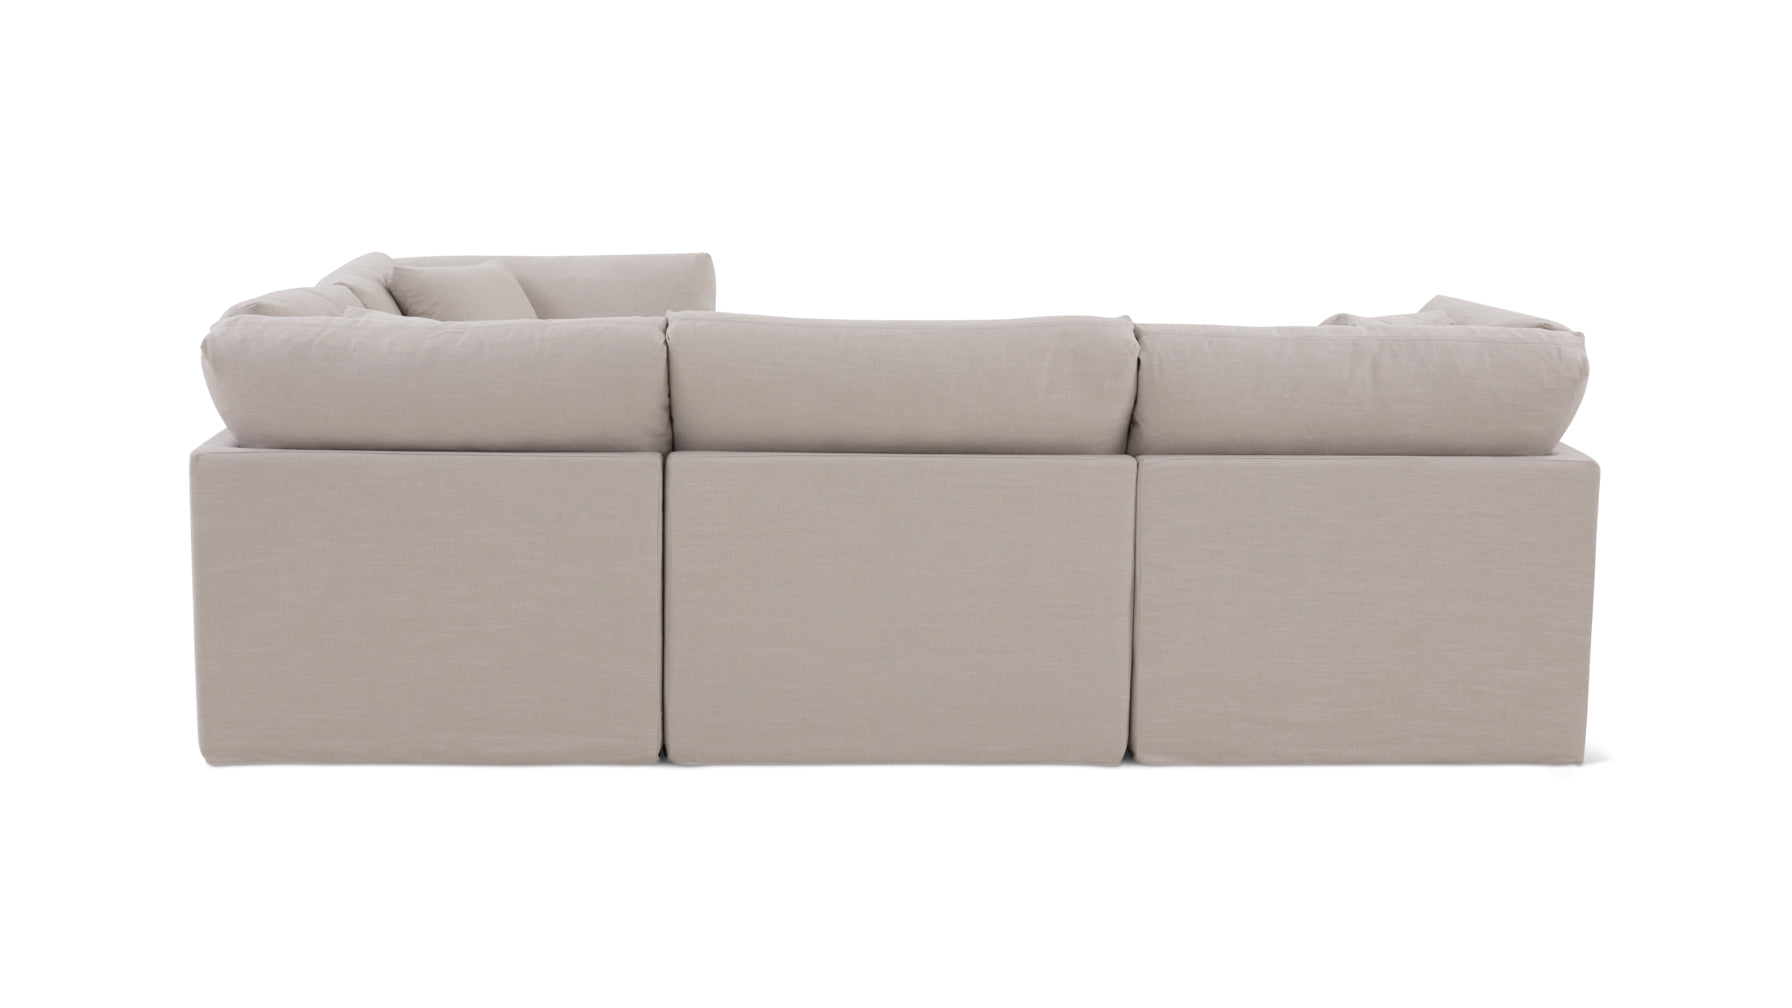 Get Together™ 4-Piece Modular Sectional Closed, Standard, Clay - Image 6